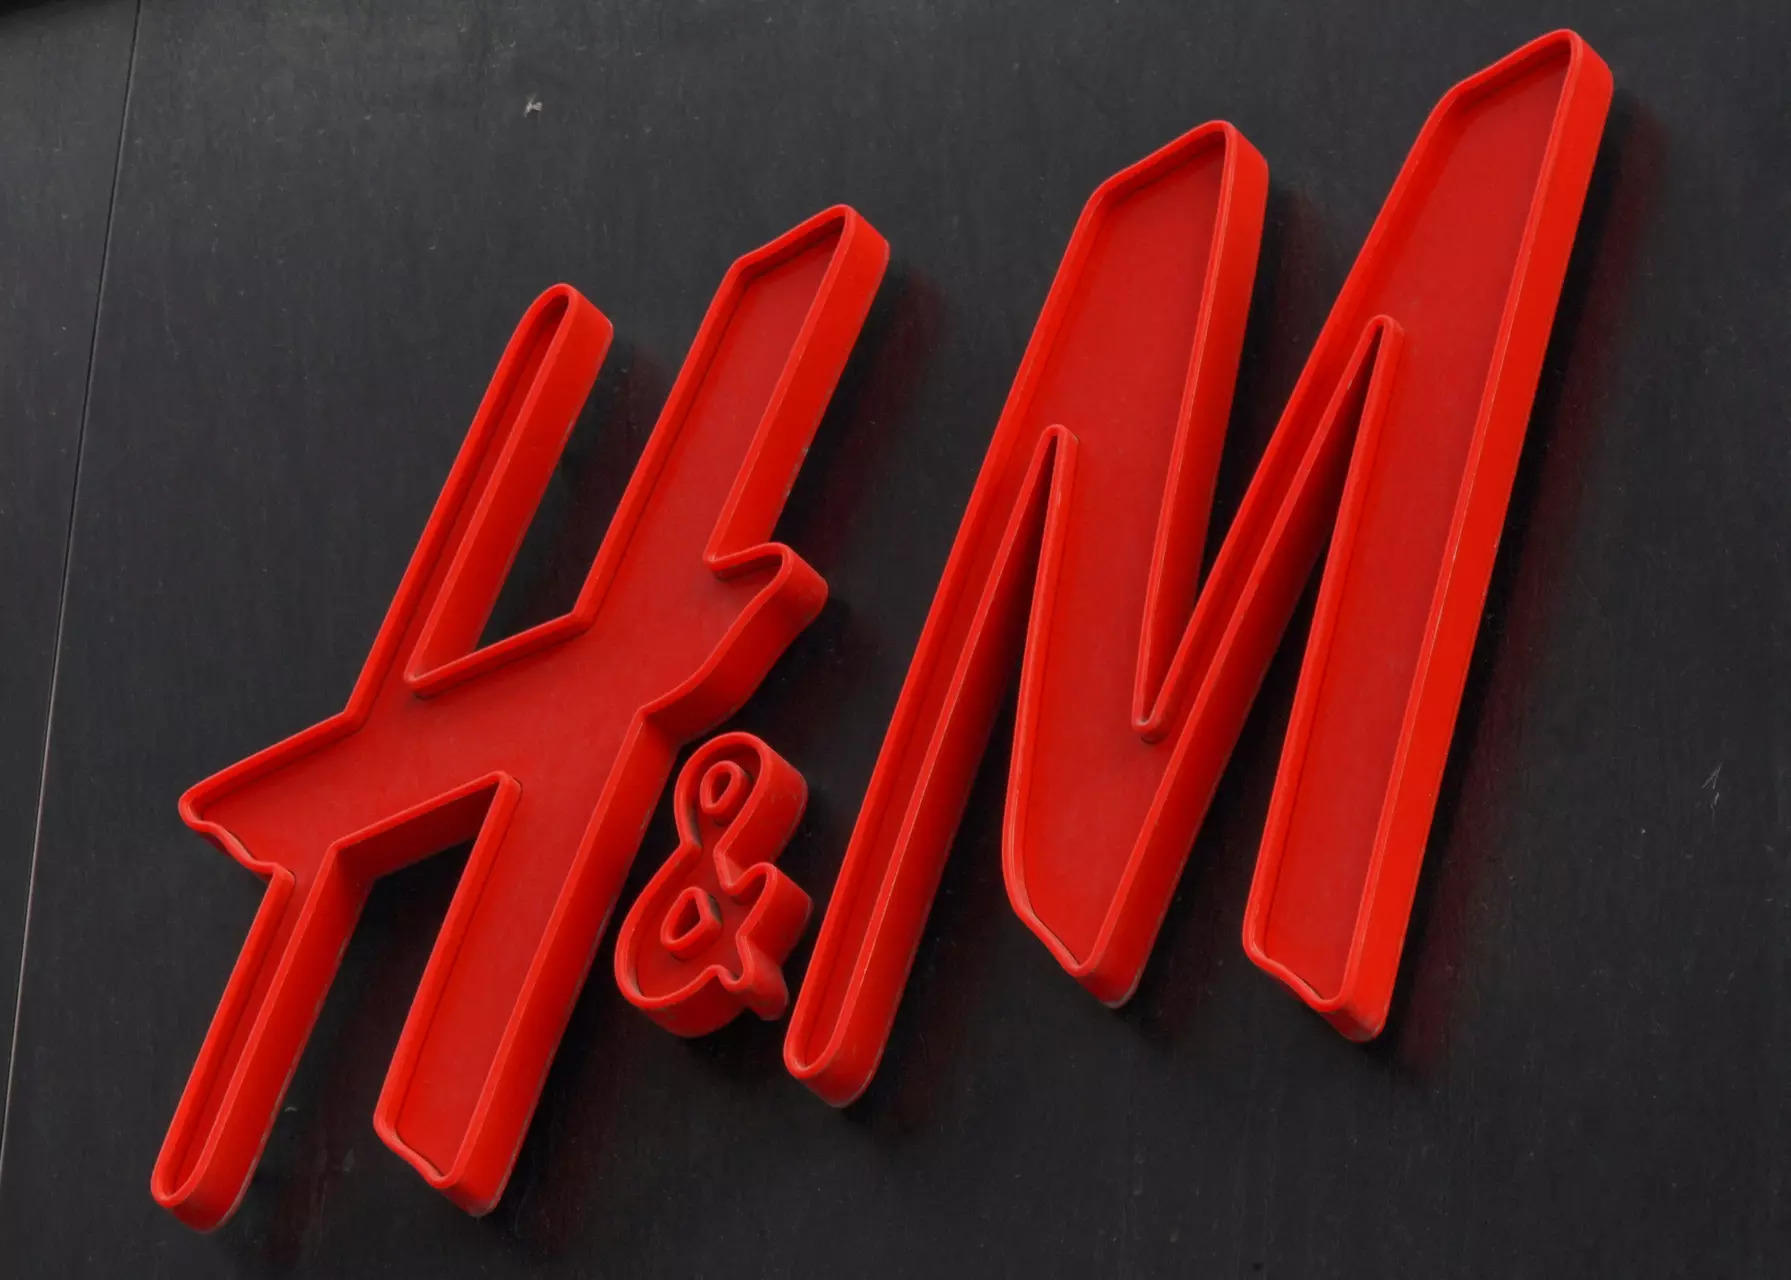 H&M aims to be preferred fashion choice for Indian masses